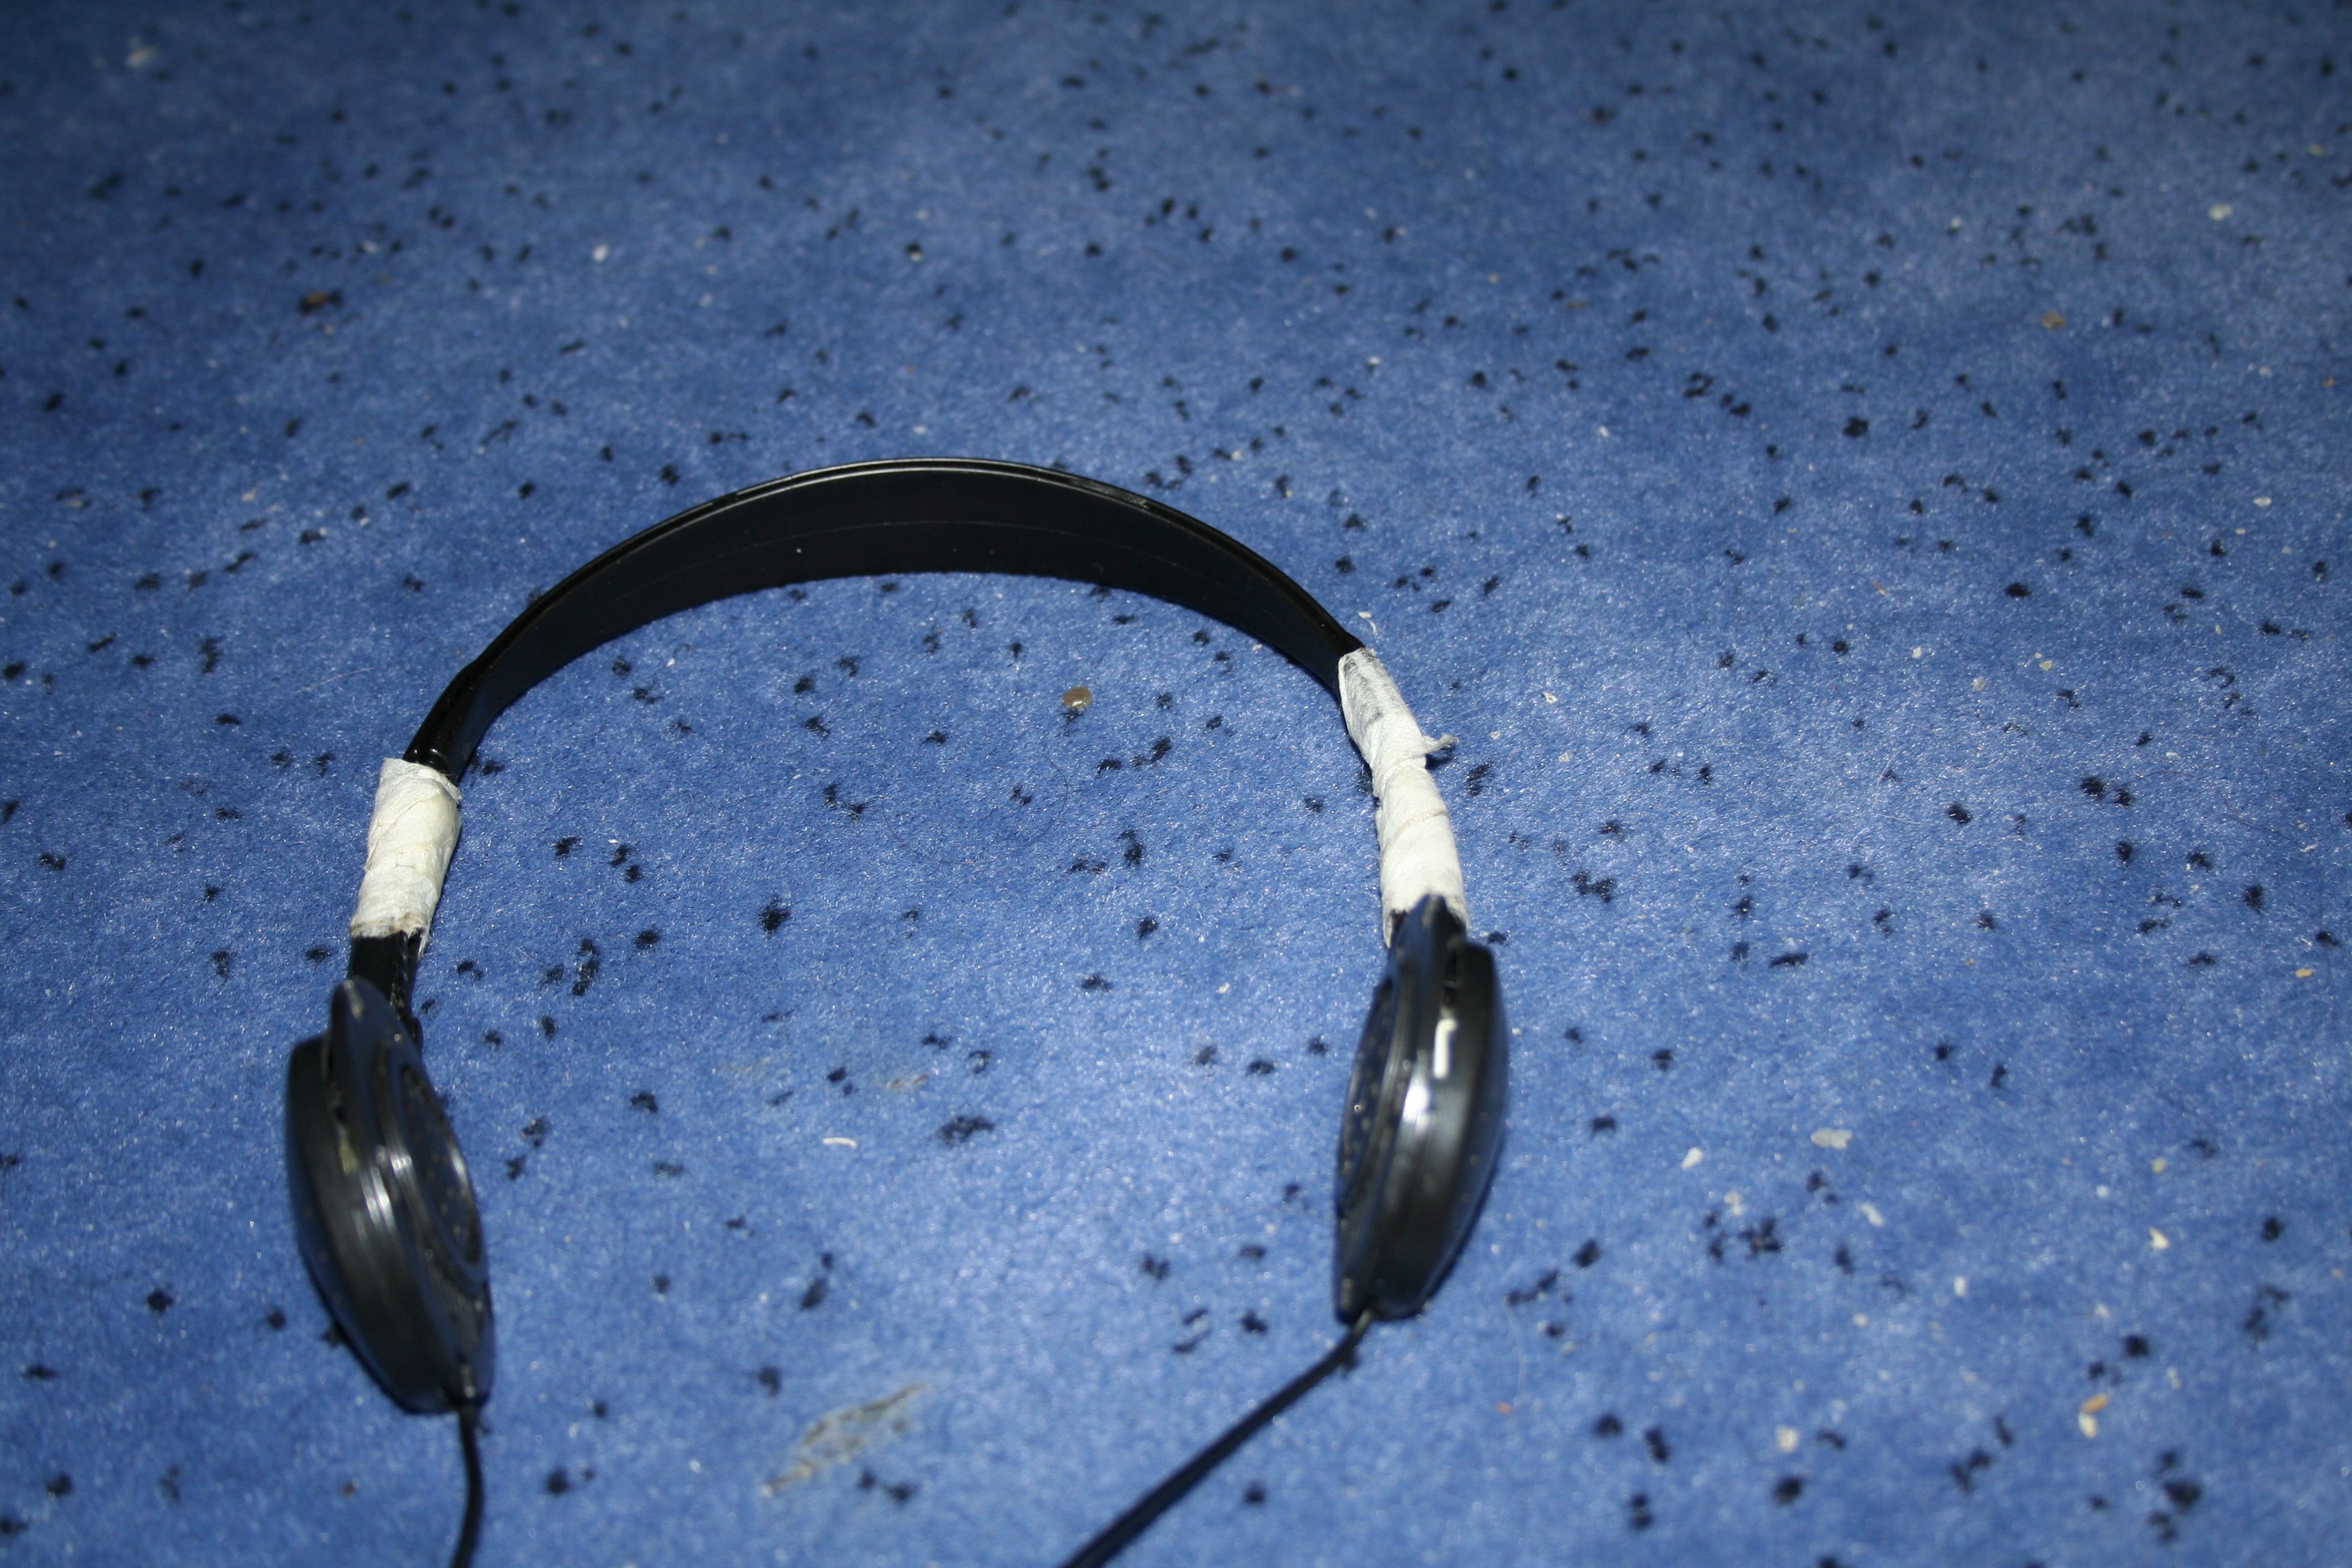 Time to buy a new pair of headphones.